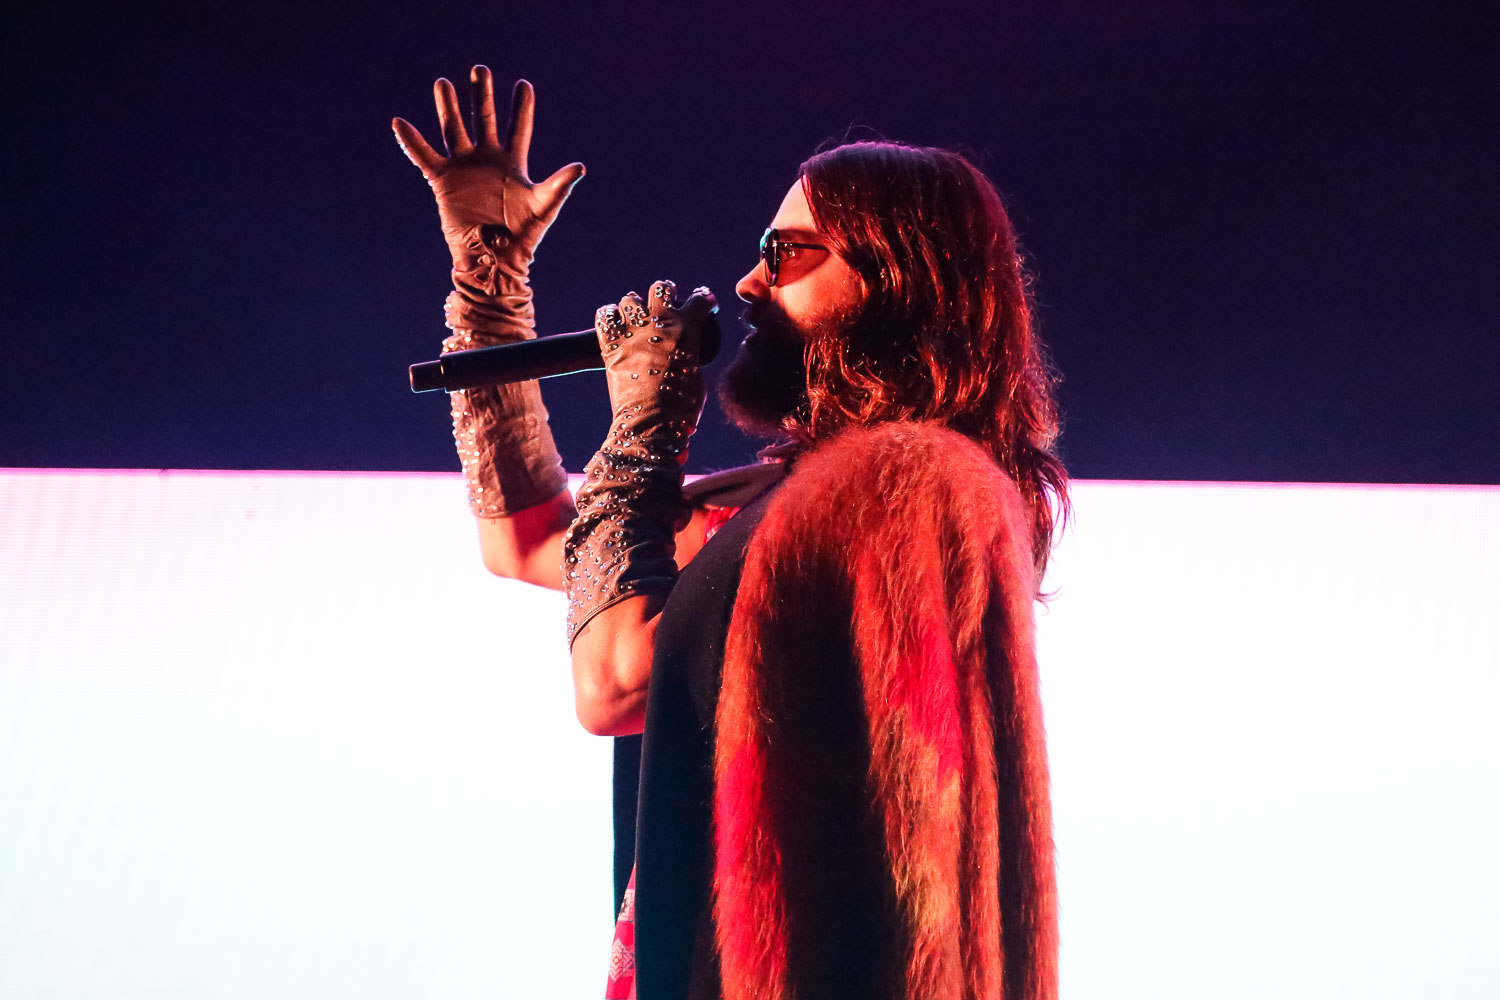 30 Seconds to Mars played the Shoreline Amphitheater on July 18, 2018